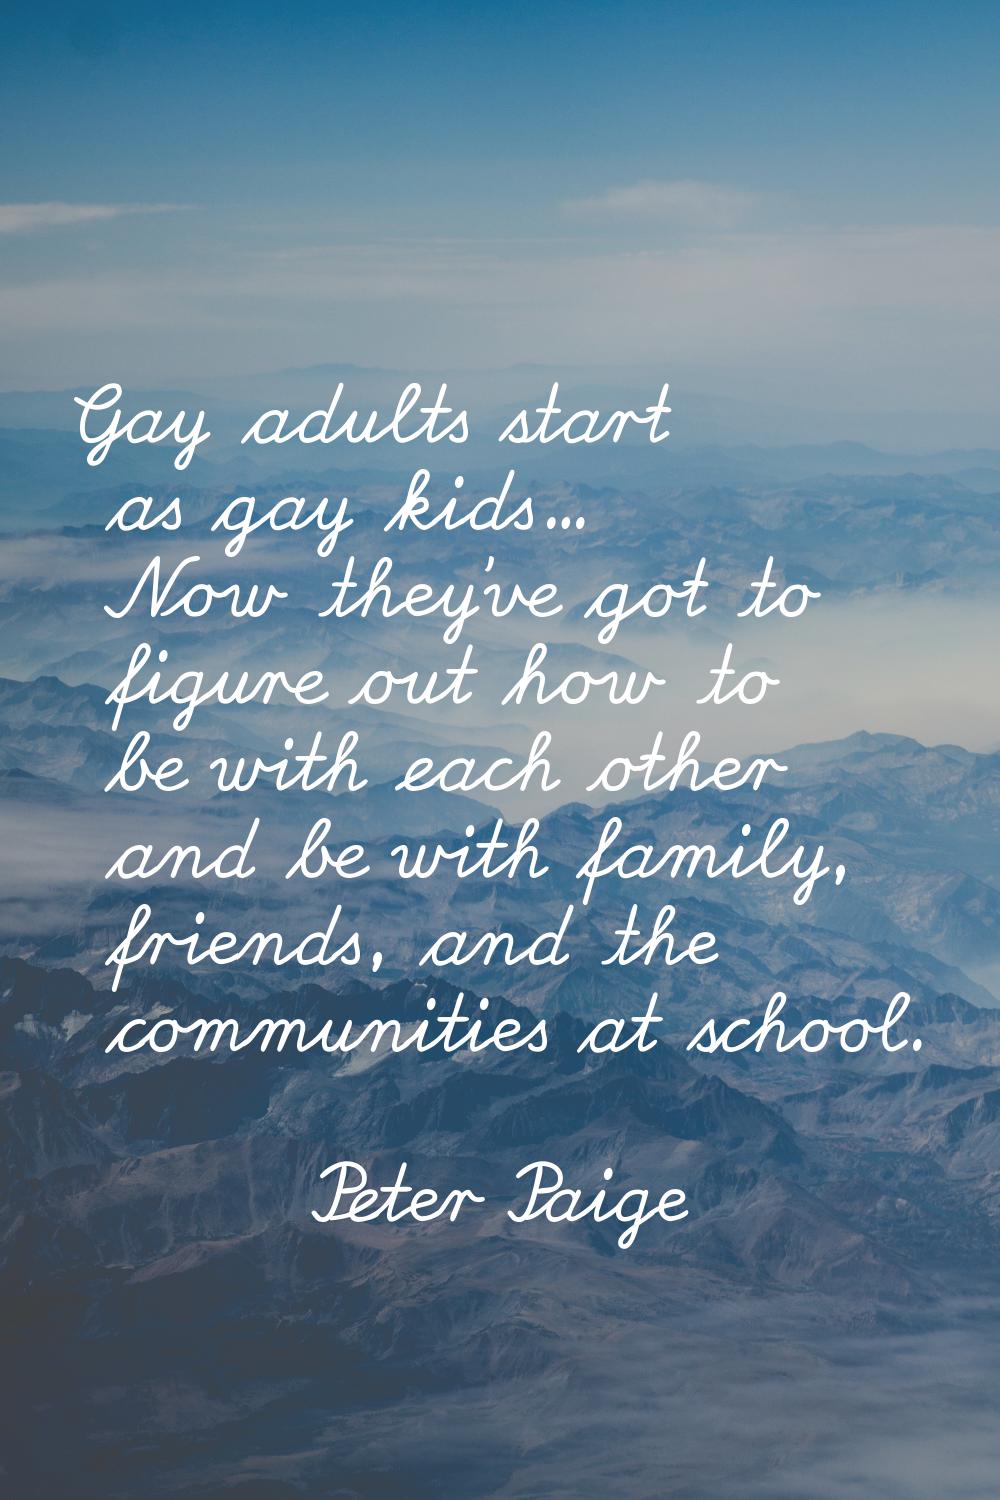 Gay adults start as gay kids... Now they've got to figure out how to be with each other and be with